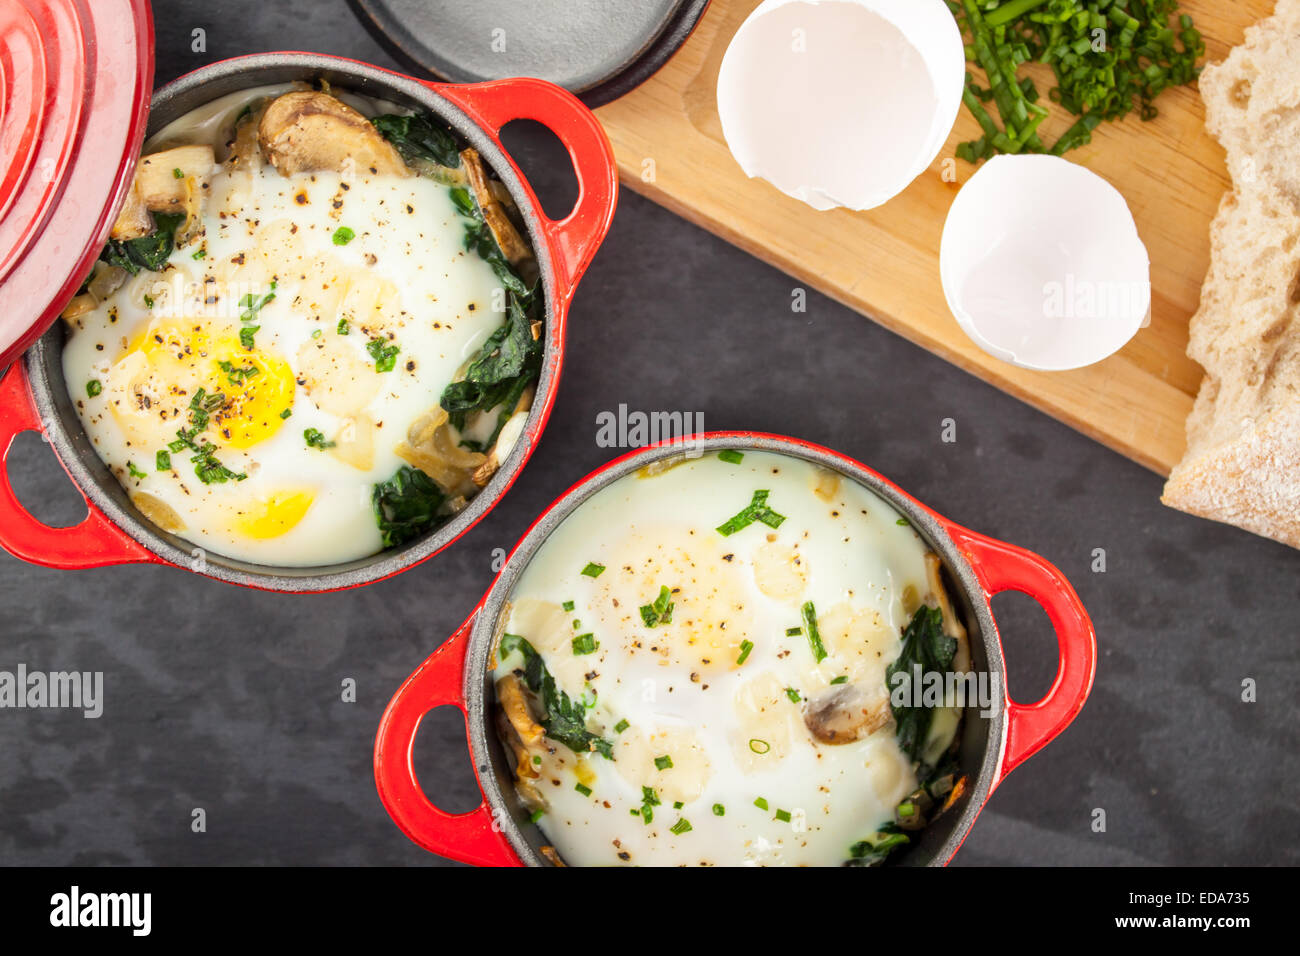 Baked Eggs in red Le Creuset croquettes on slate with garnishes and cutting board background Stock Photo